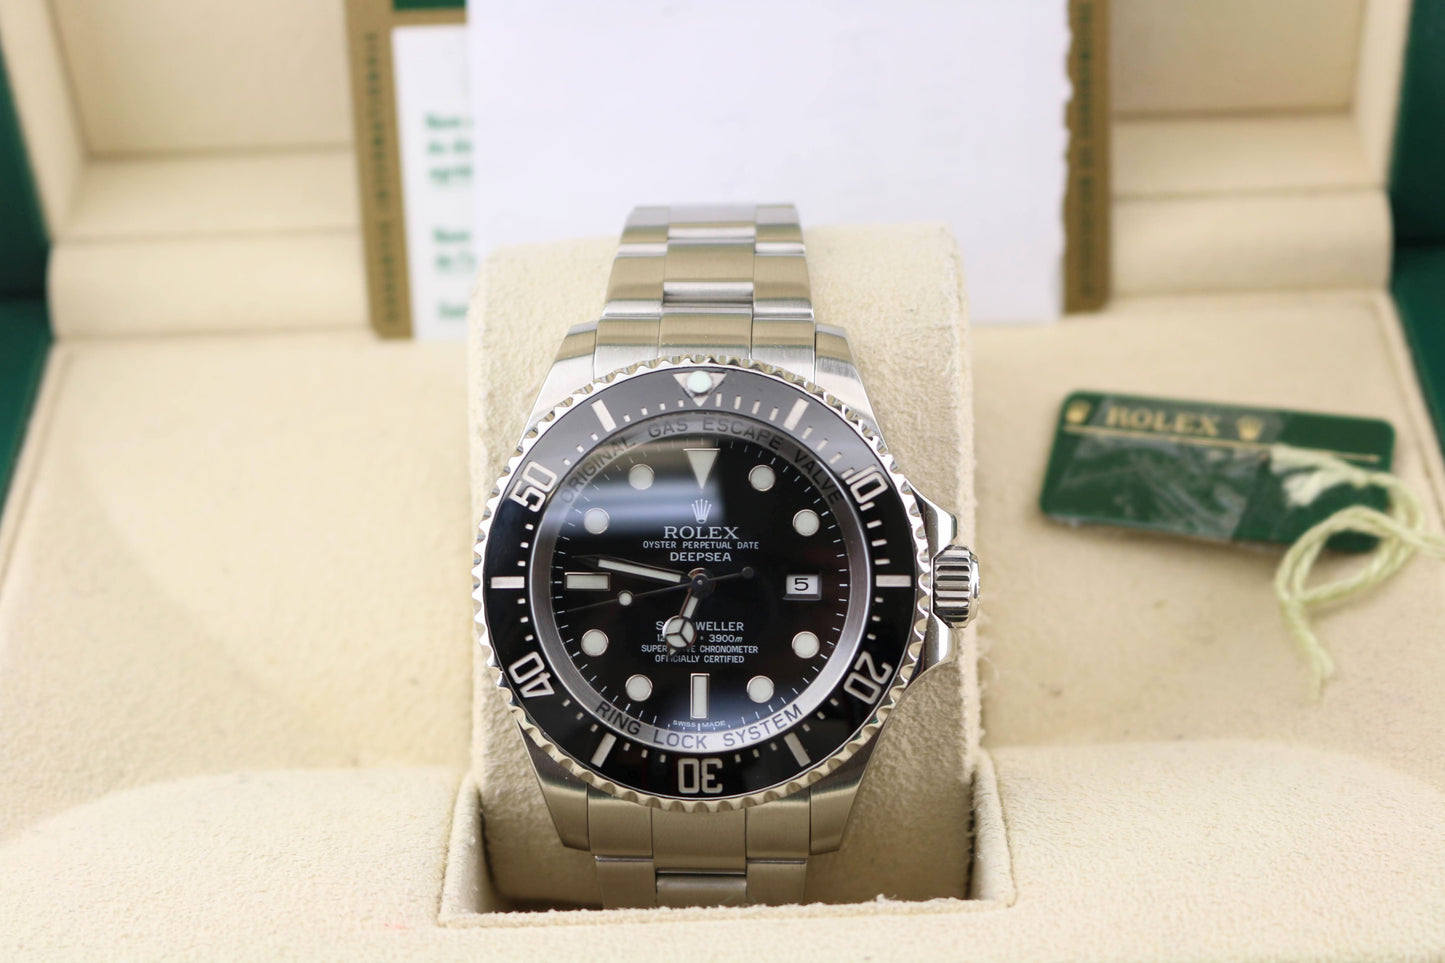 2010 Rolex Deepsea Sea-Dweller 116660 Black Dial SS Oyster With Papers 44mm